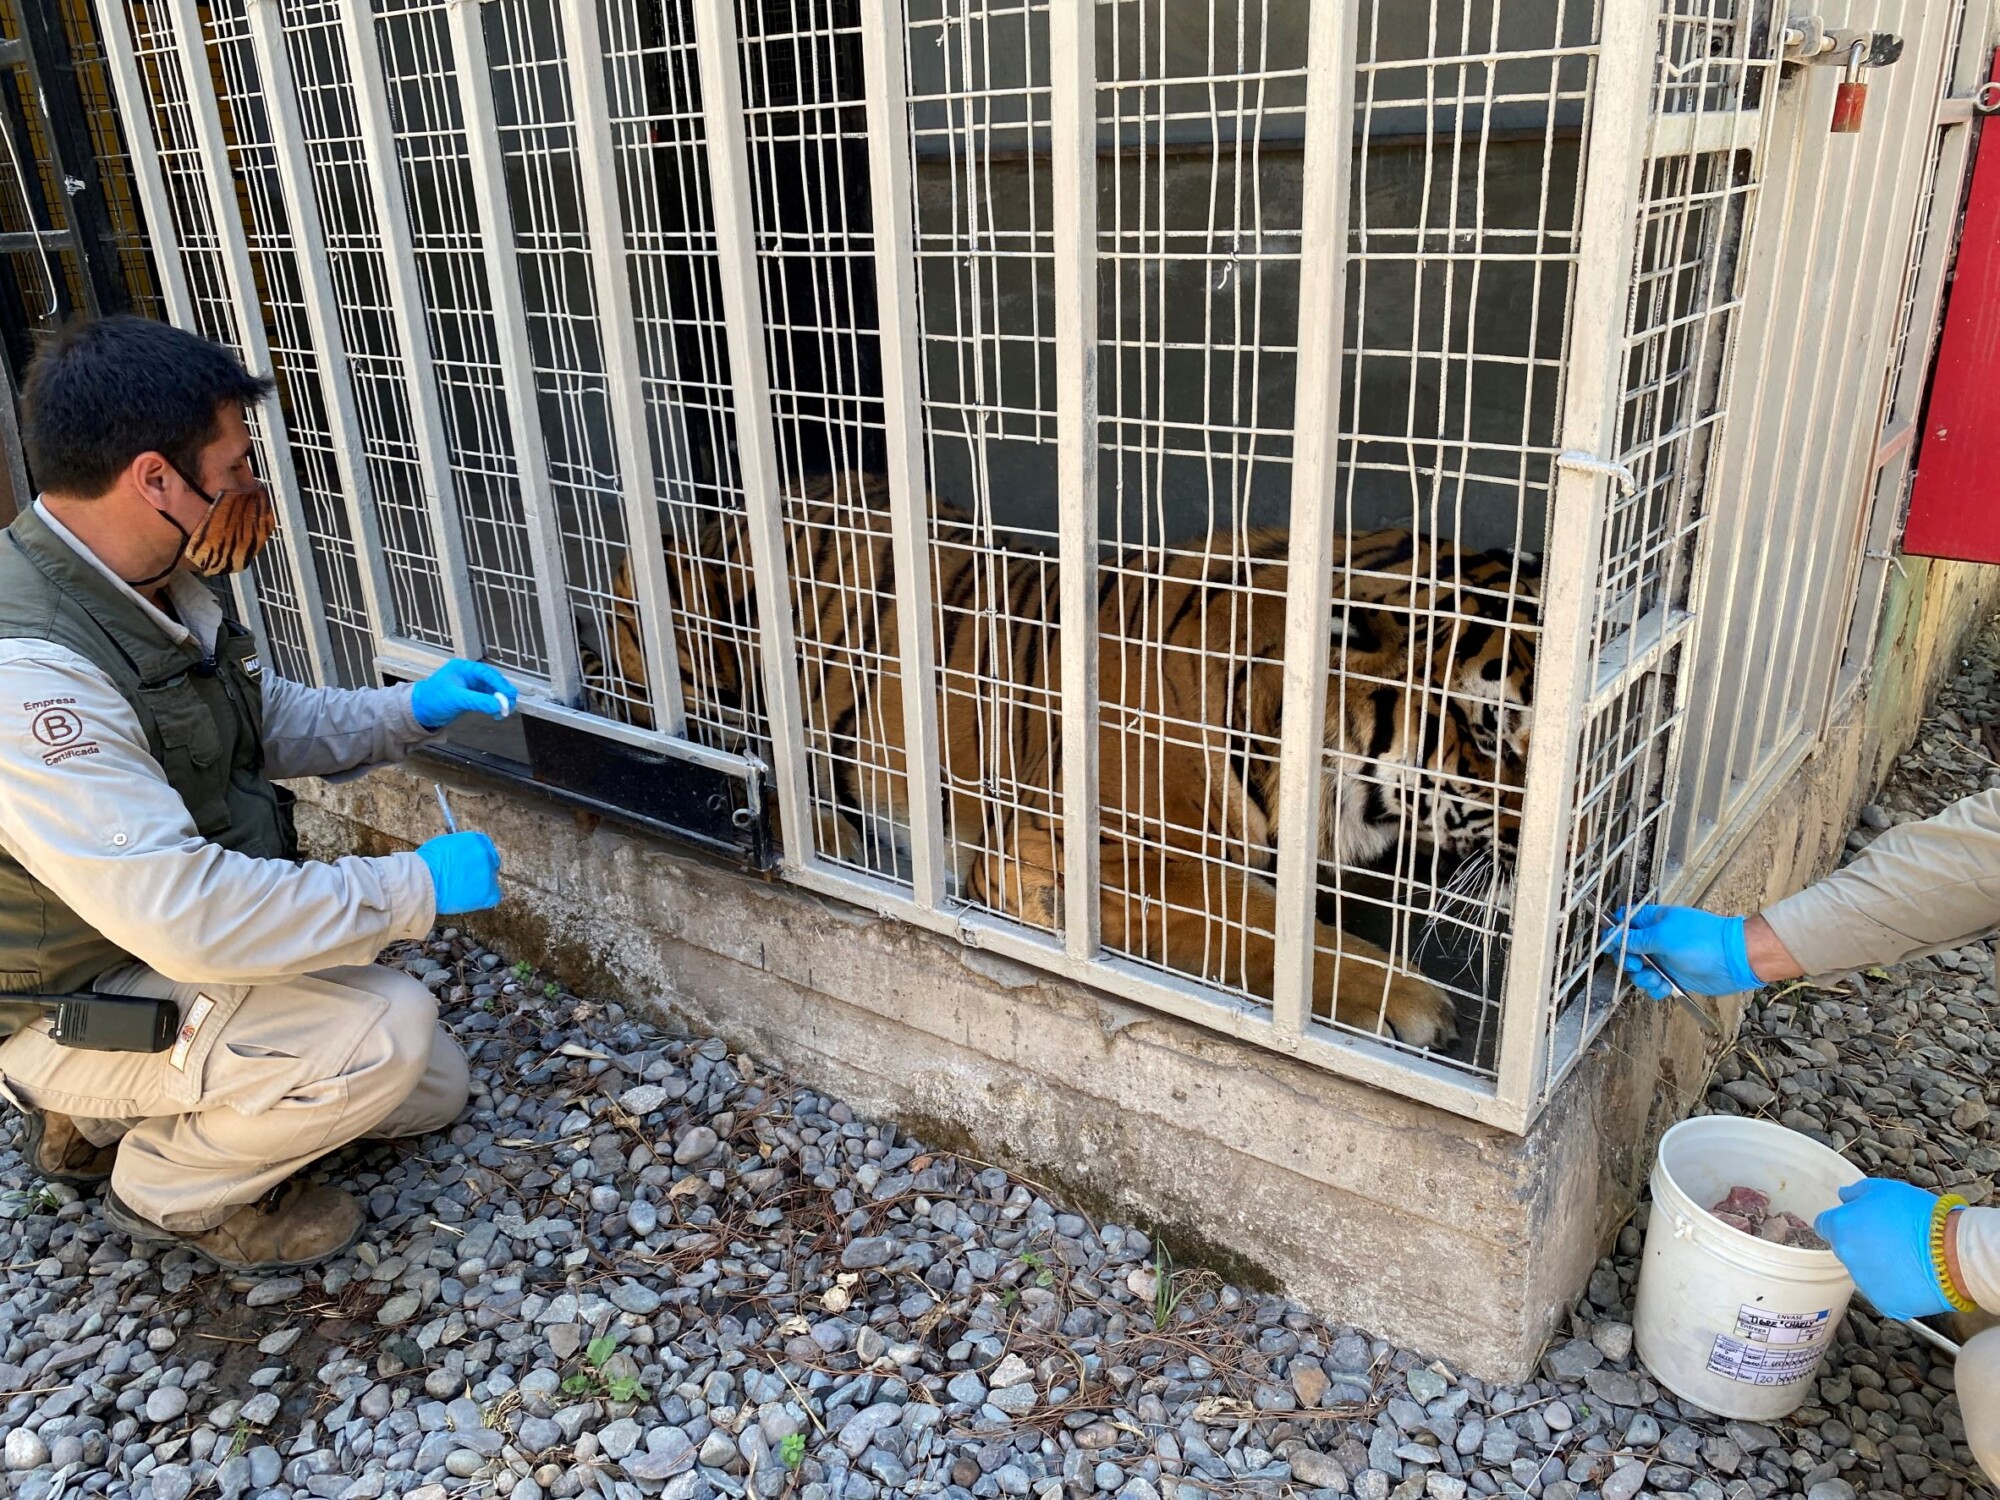 Zoo in Chile Tests Experimental COVID-19 Vaccine on Lions and Tigers